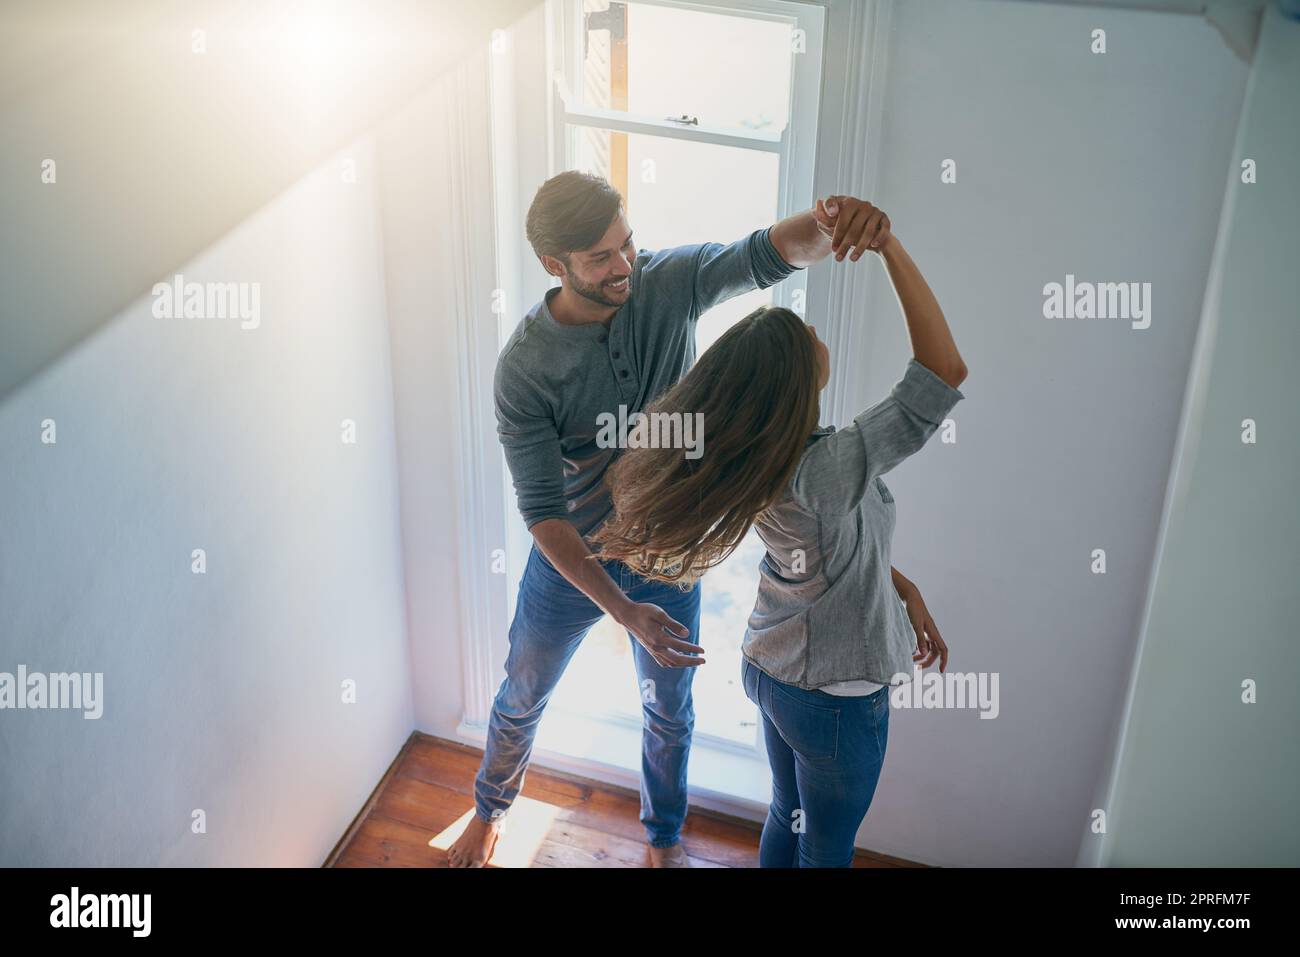 Dancing until the sun goes down. an affectionate young couple dancing at home cheerfully. Stock Photo